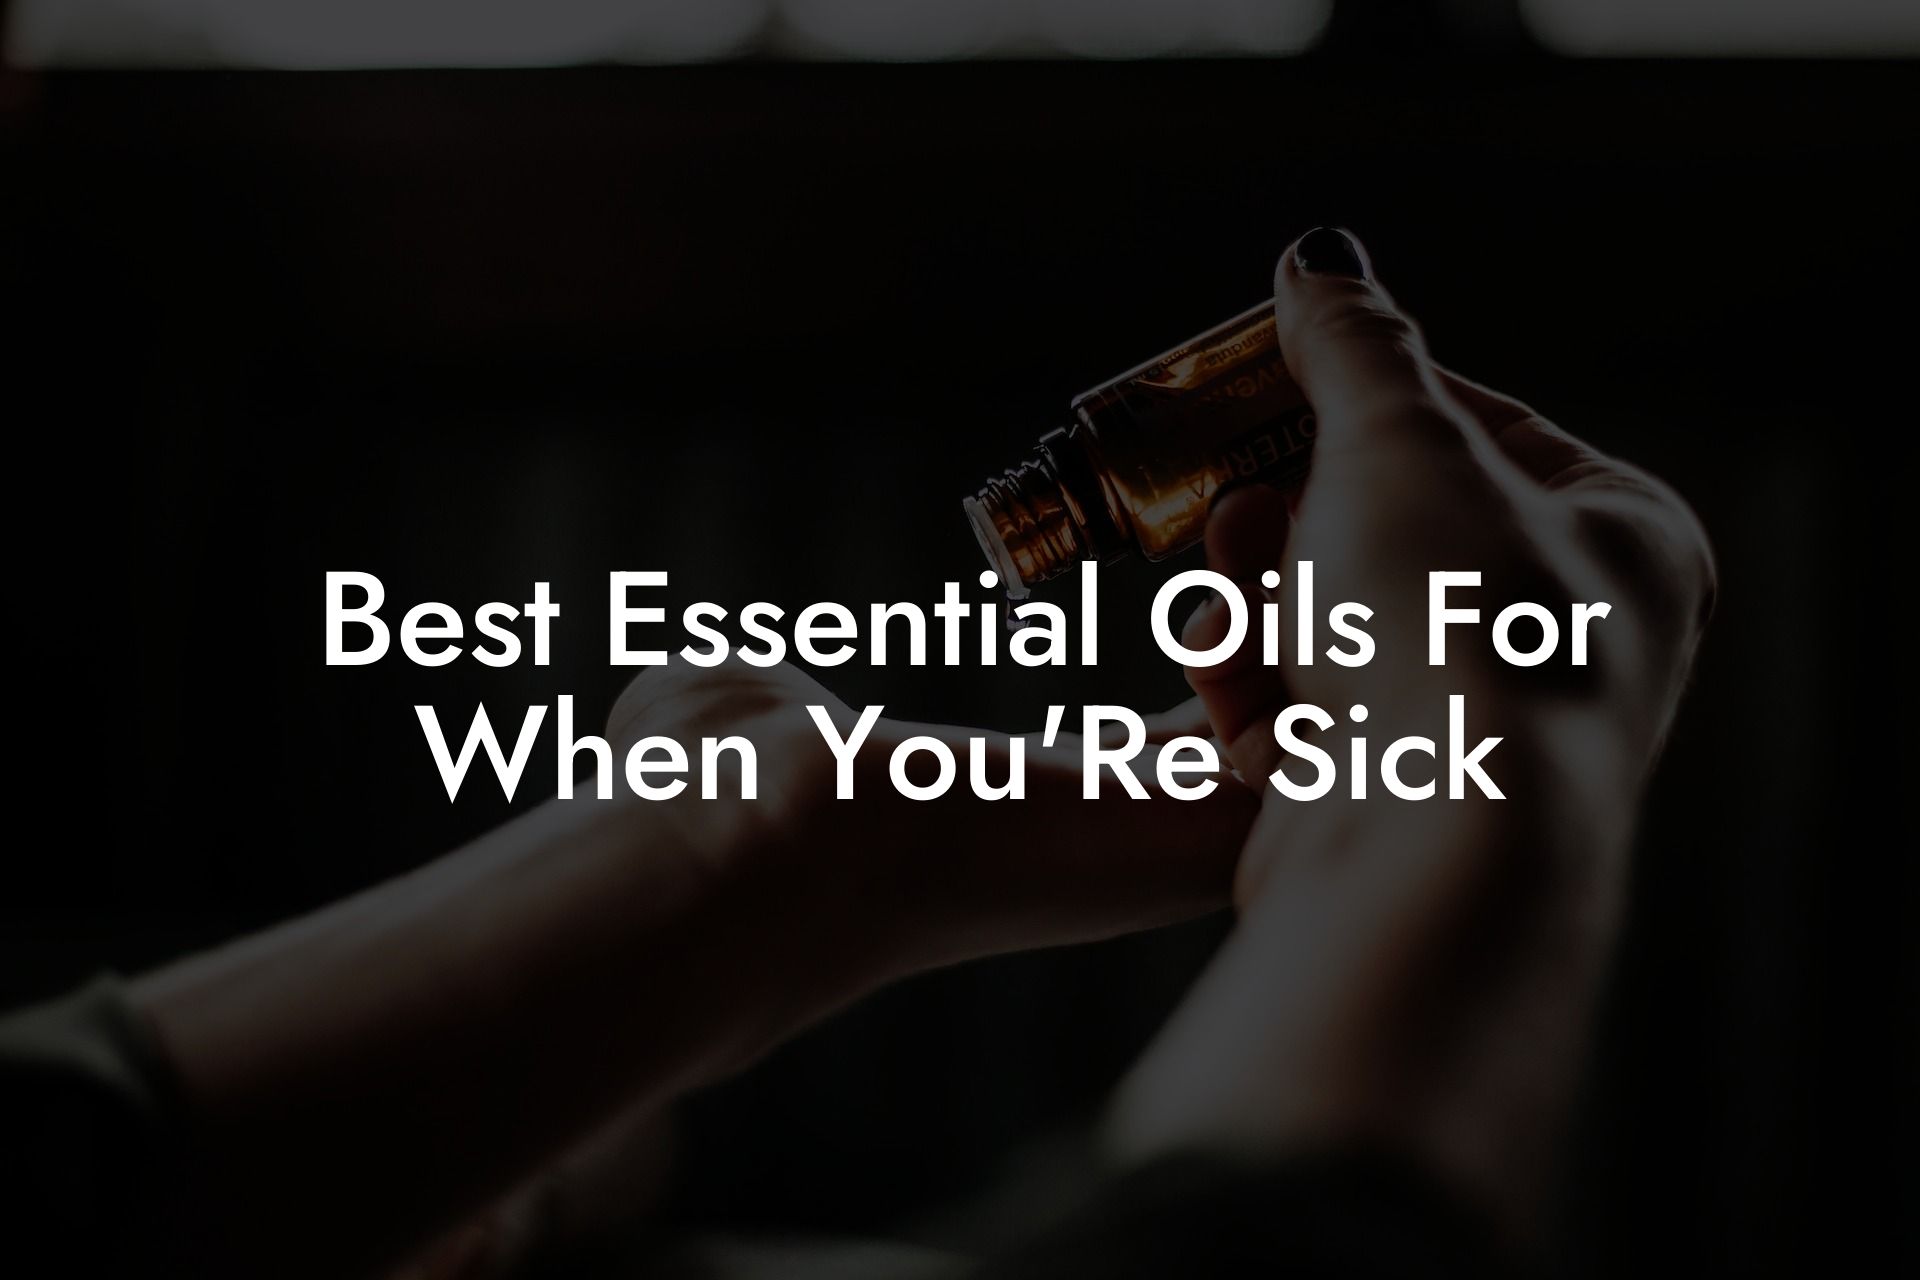 Best Essential Oils For When You'Re Sick